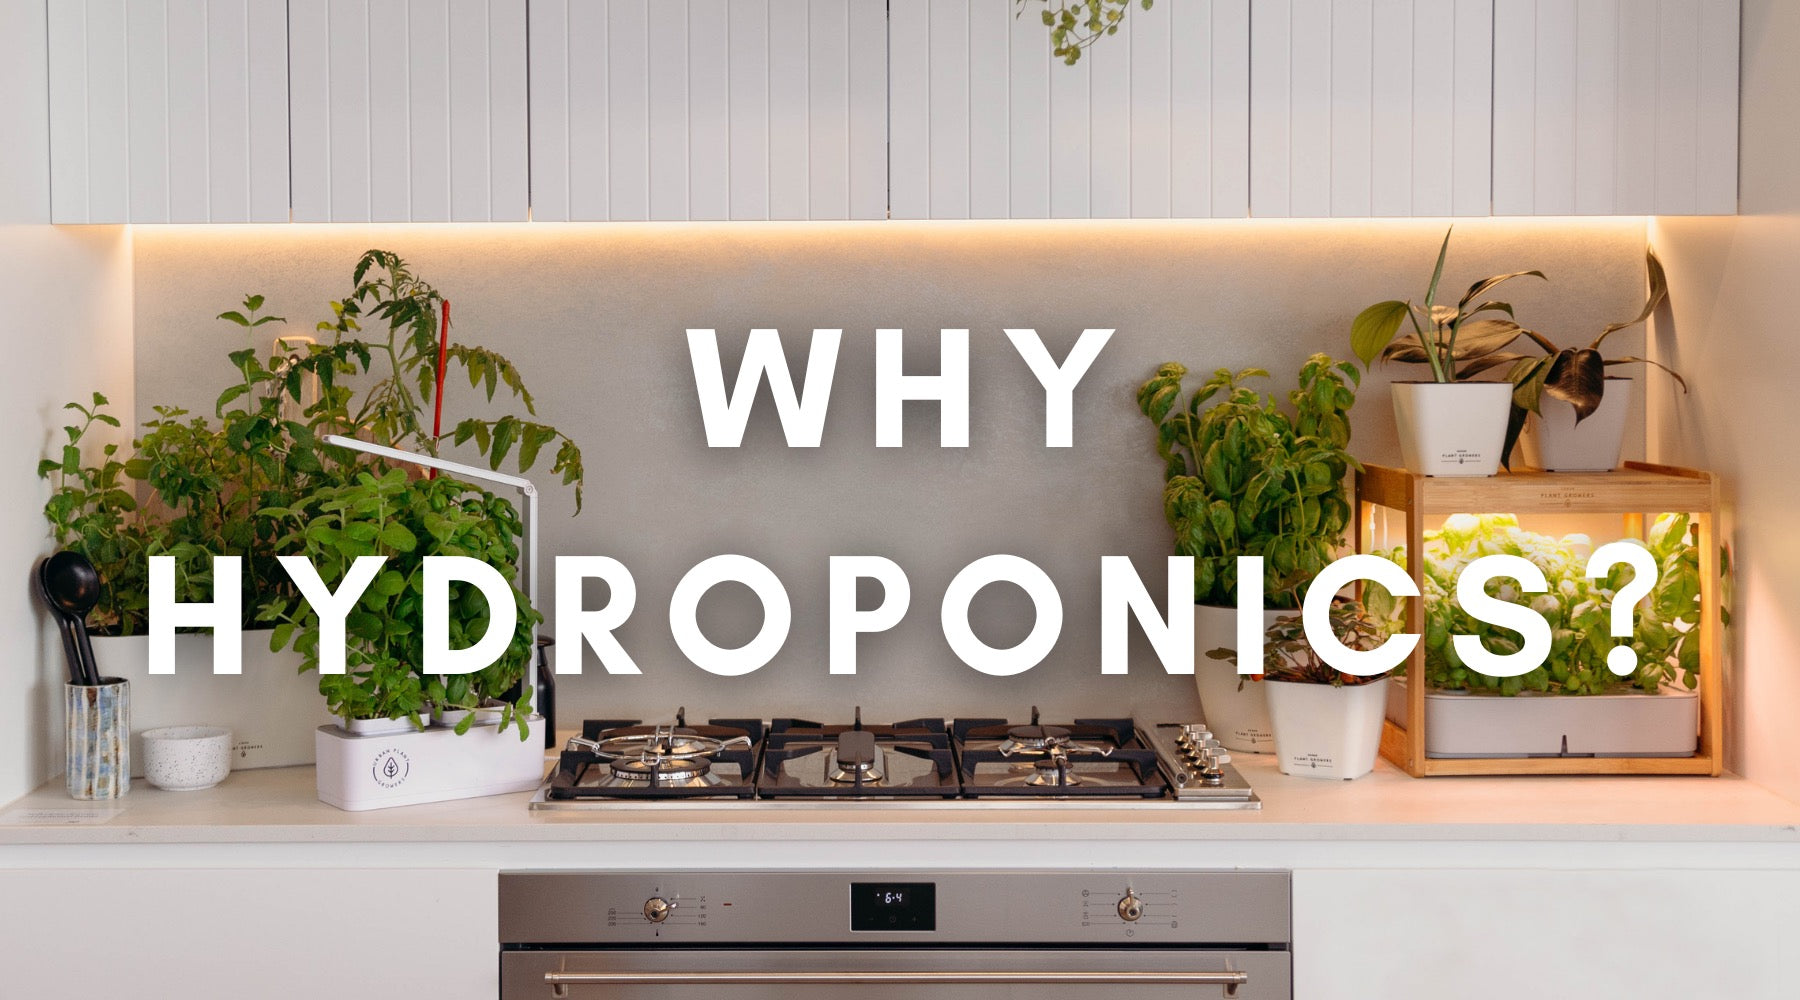 kitchen bench with food growing in hydroponic set up with text overlaid "why hydroponics"